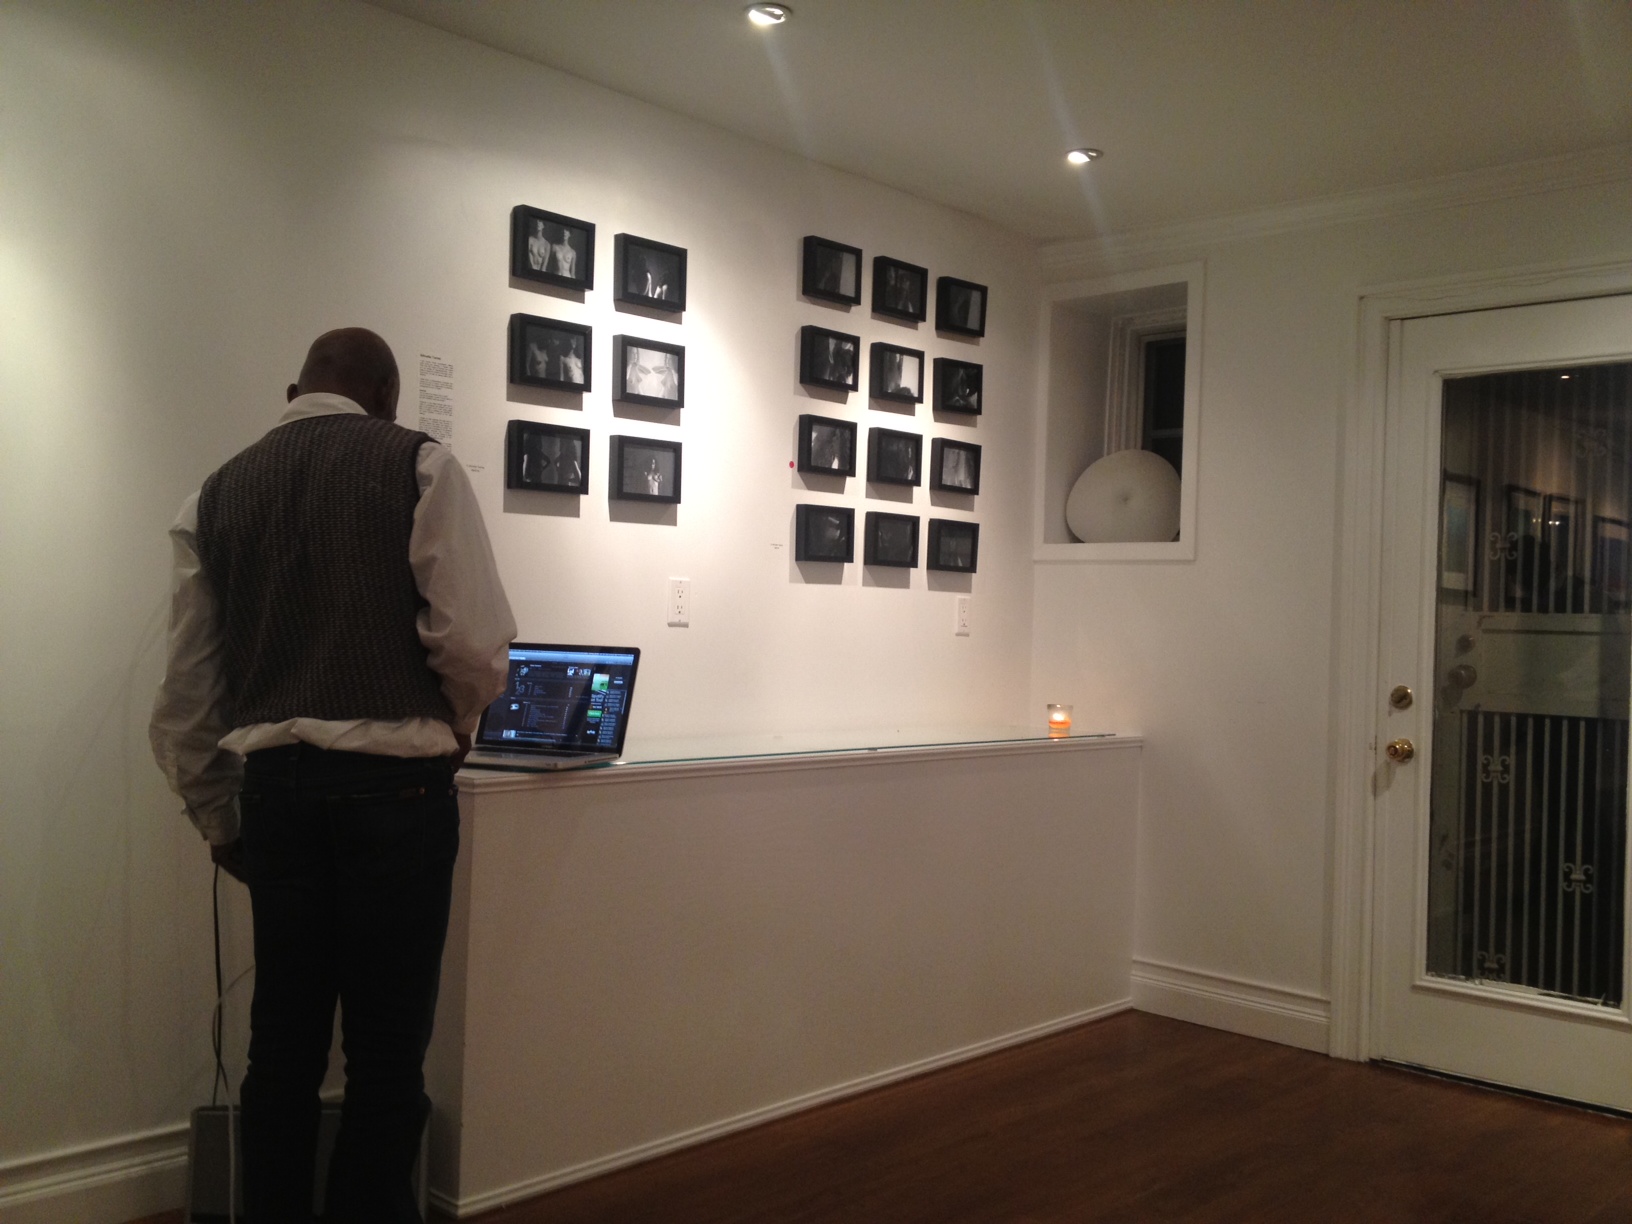 Images from the installation at Maison